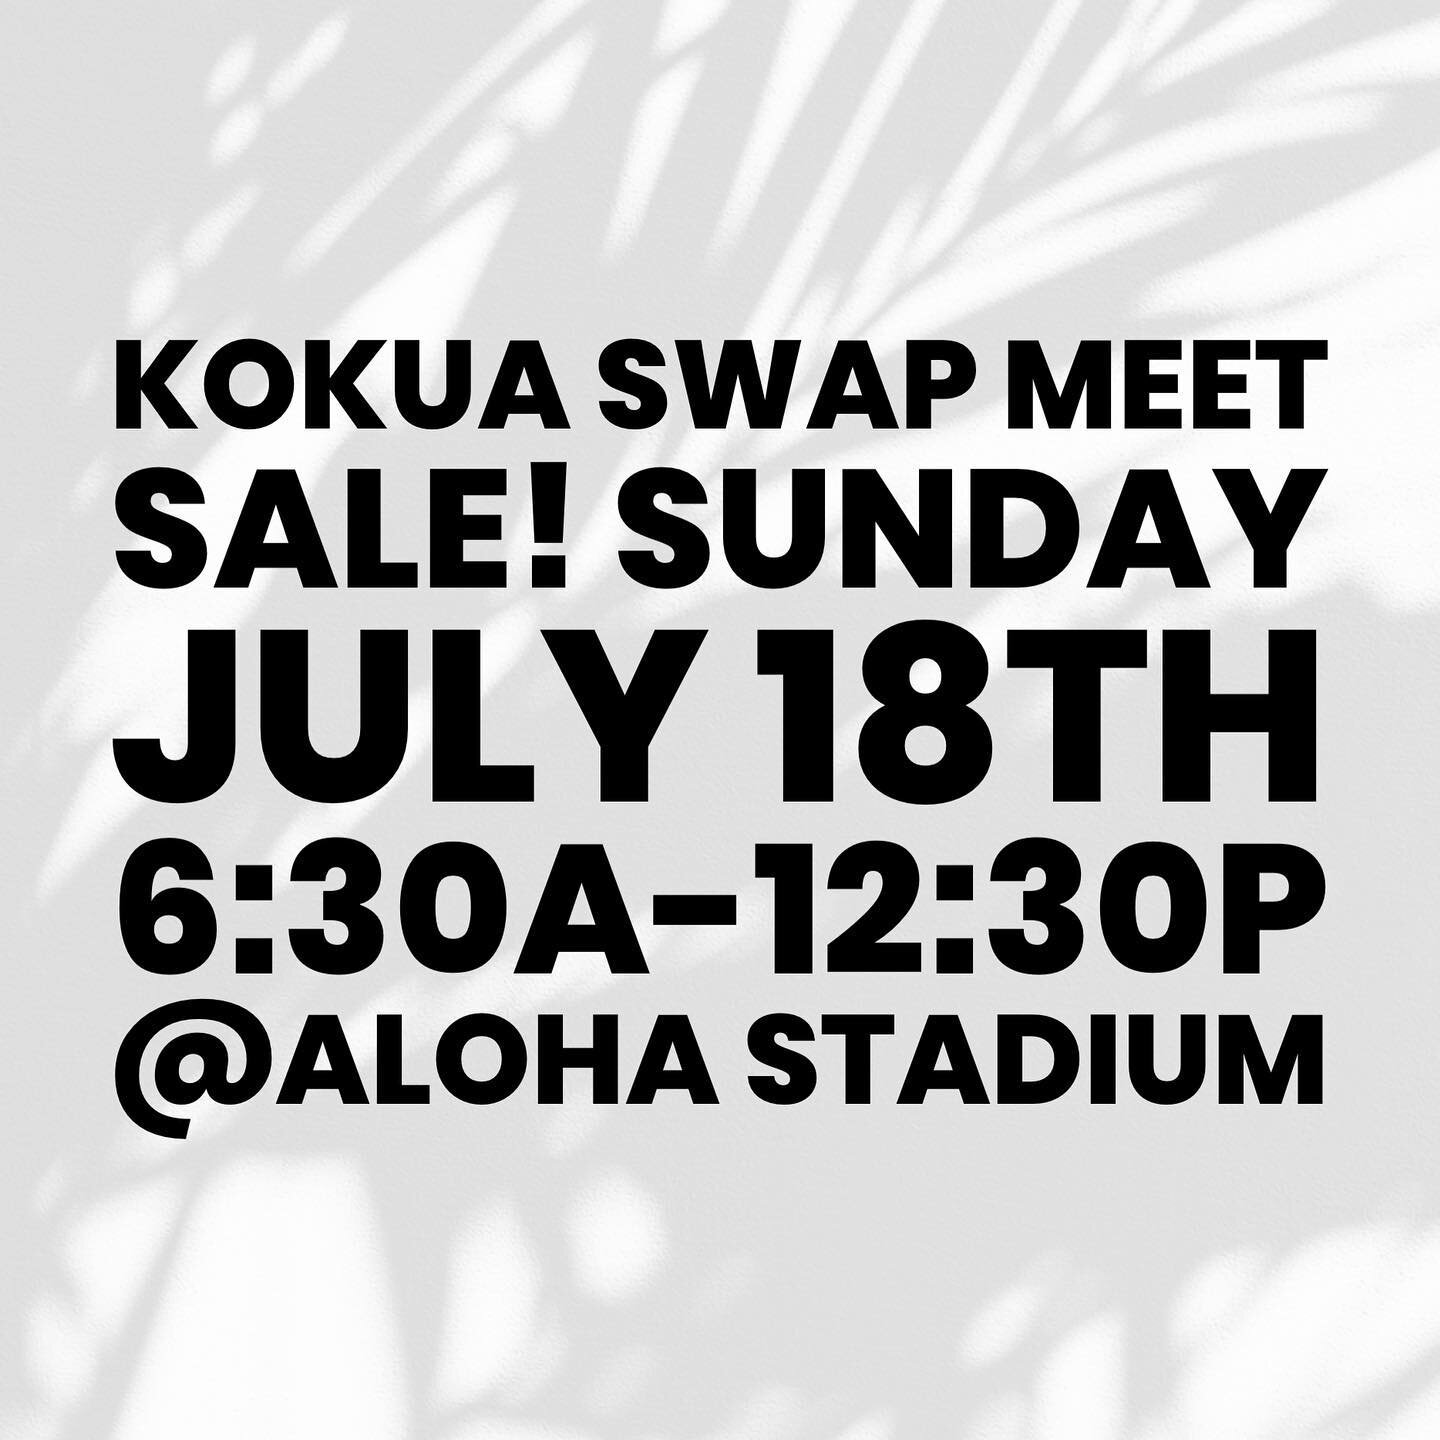 Booth number to be announced the morning of.. 
.
Good condition clothing (some new w/tags) and household items for $1-$5 DEALS DEALS DEALS ALL DAY!  100% of all revenue generated goes to @kokuaprojecthi for their community outreach programs and event